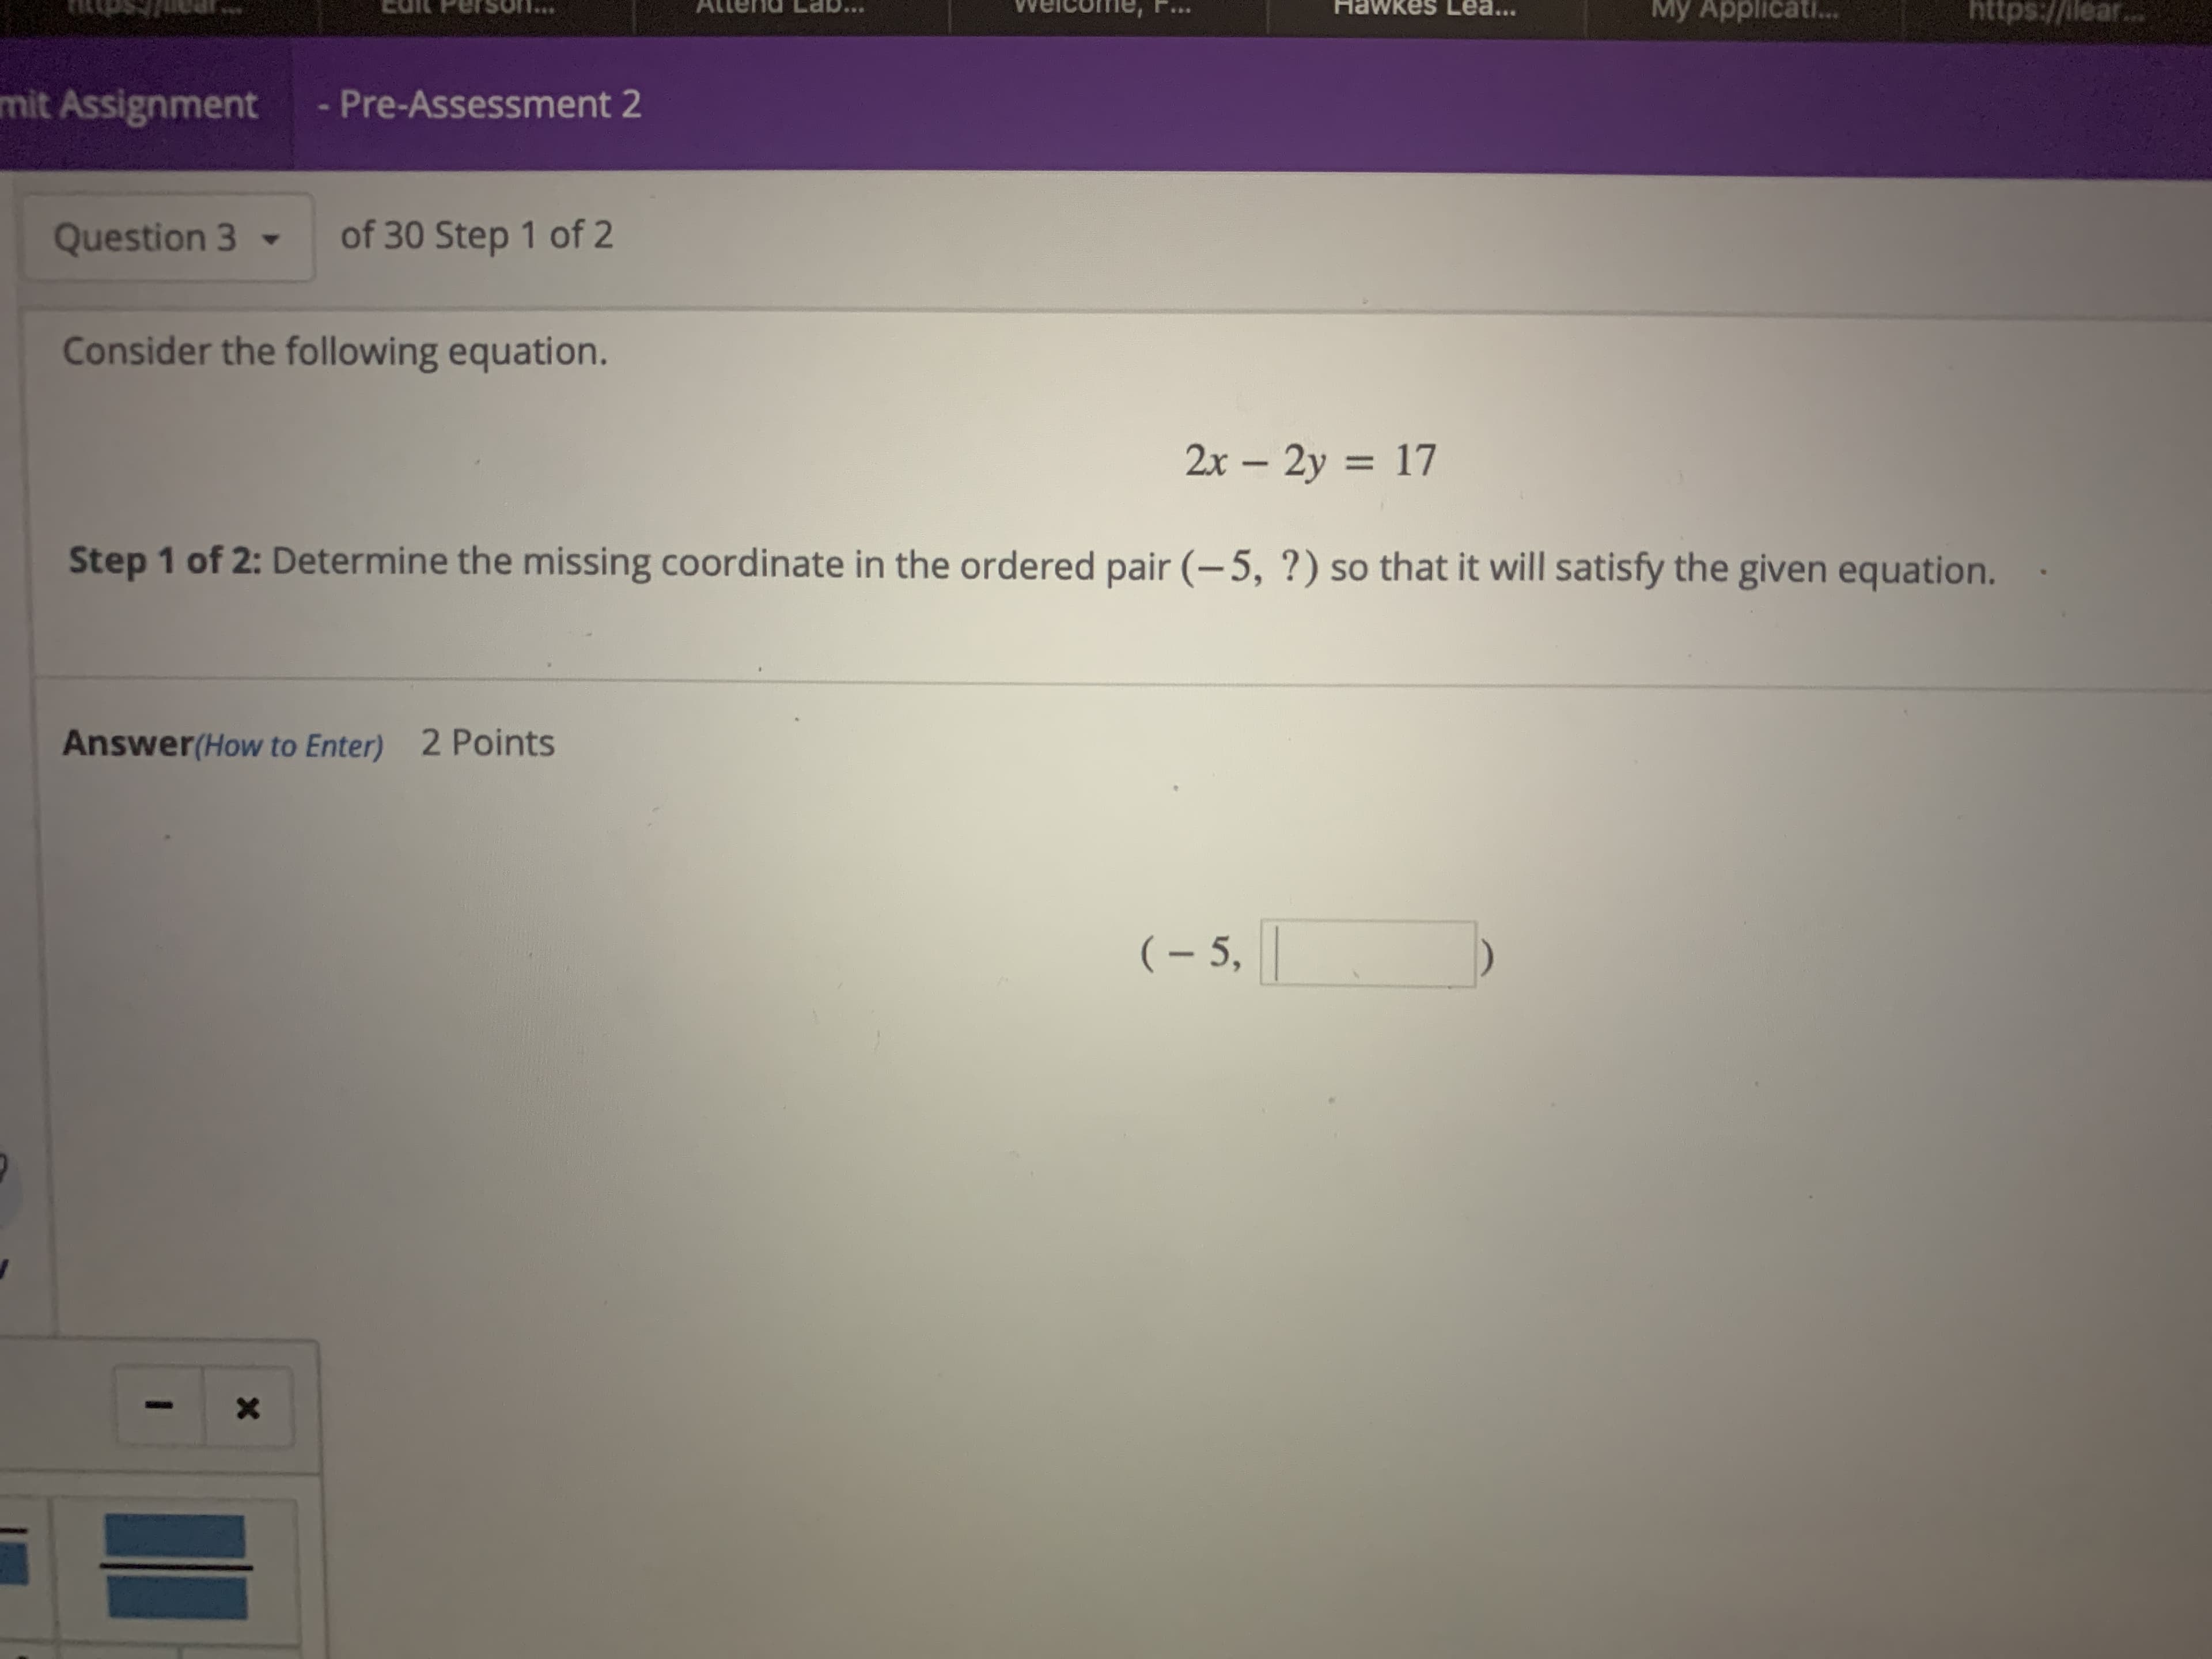 WKes Lea...
My Applicat...
https://llear
..
mit Assignment
Pre-Assessment 2
of 30 Step 1 of 2
Question 3
Consider the following equation.
2x-2y 17
Step 1 of 2: Determine the missing coordinate in the ordered pair (-5, ?) so that it will satisfy the given equation.
Answer(How to Enter) 2 Points
(- 5,
